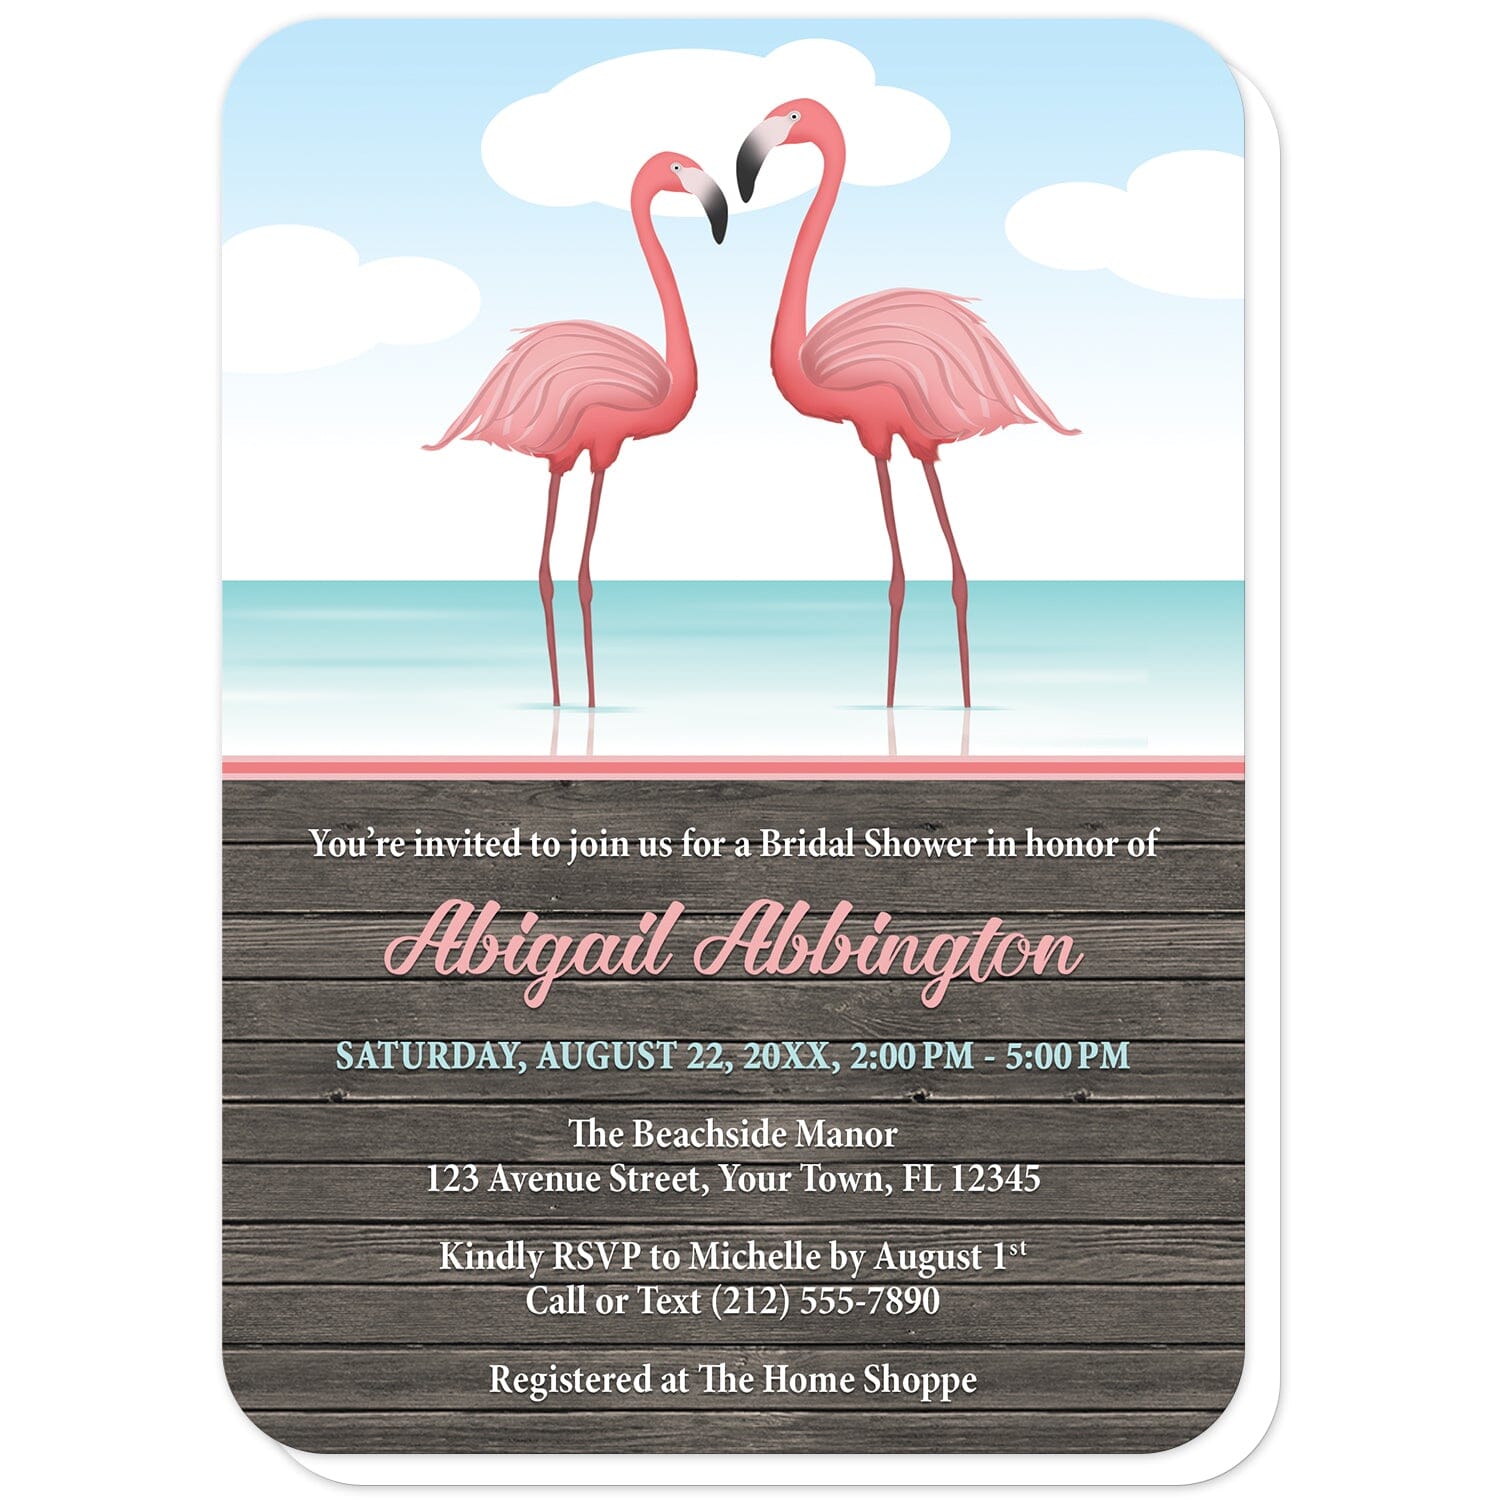 Flamingos in the Water Rustic Bridal Shower Invitations (with rounded corners) at Artistically Invited. Flamingos in the water rustic bridal shower invitations with a tropical illustration of two pink flamingos standing in the water. Your personalized bridal shower celebration details are custom printed in pink, teal, and white over a brown rustic wood background design below the flamingos.